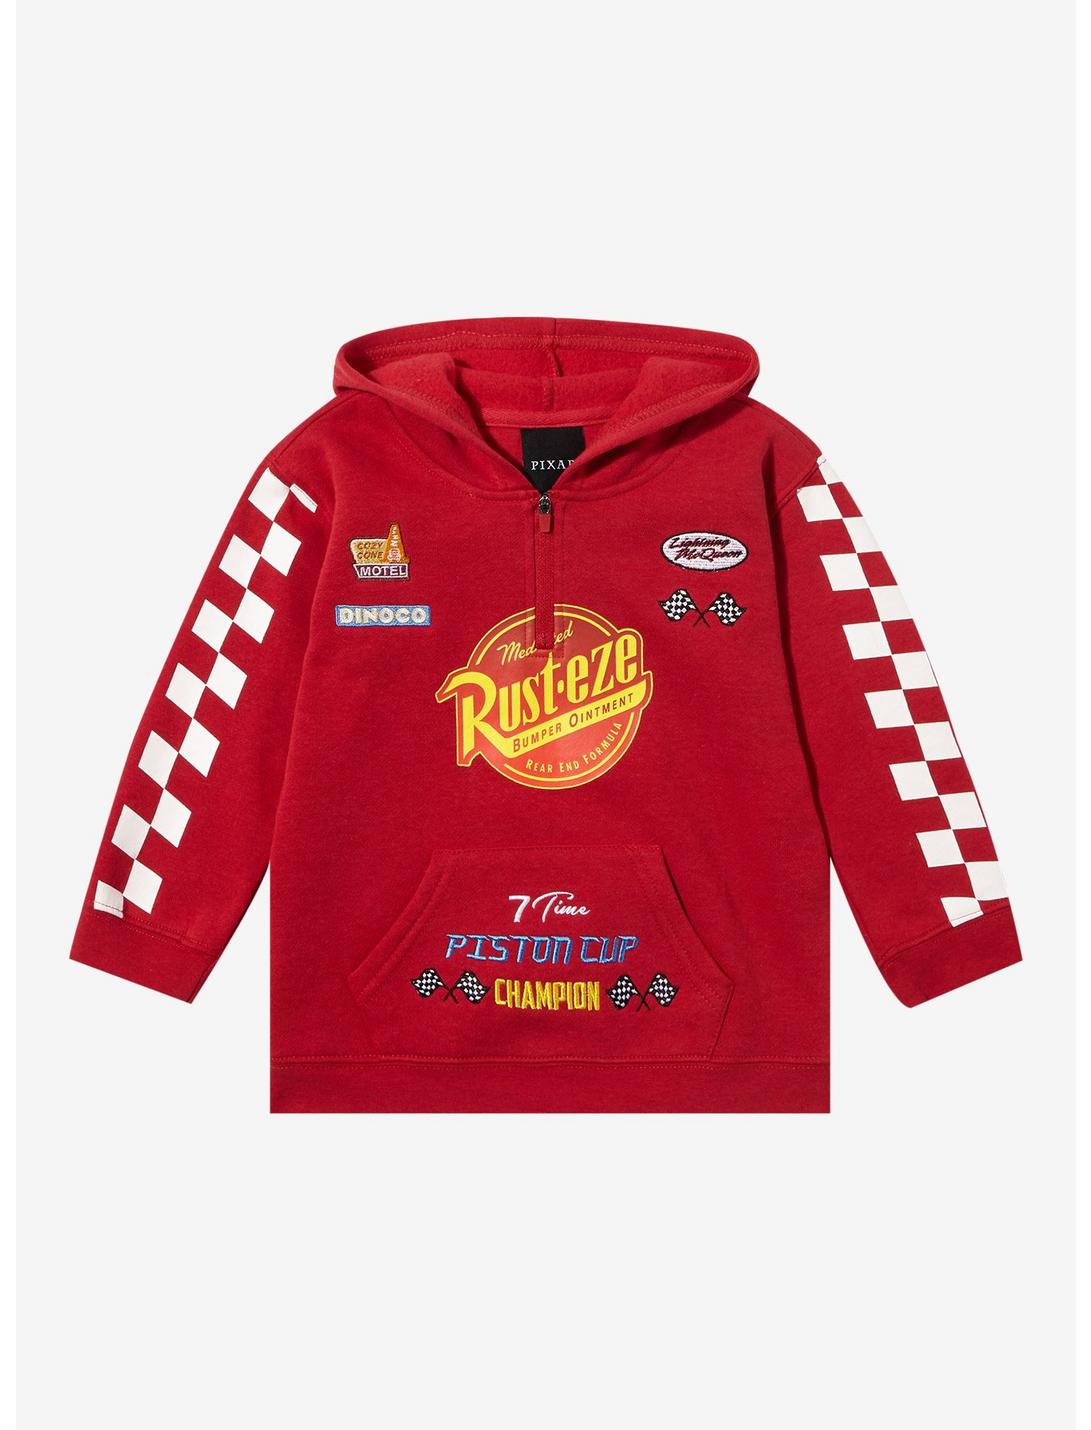 Disney Pixar Cars Lightning McQueen Icons Toddler Hoodie - BoxLunch Exclusive, RED, hi-res